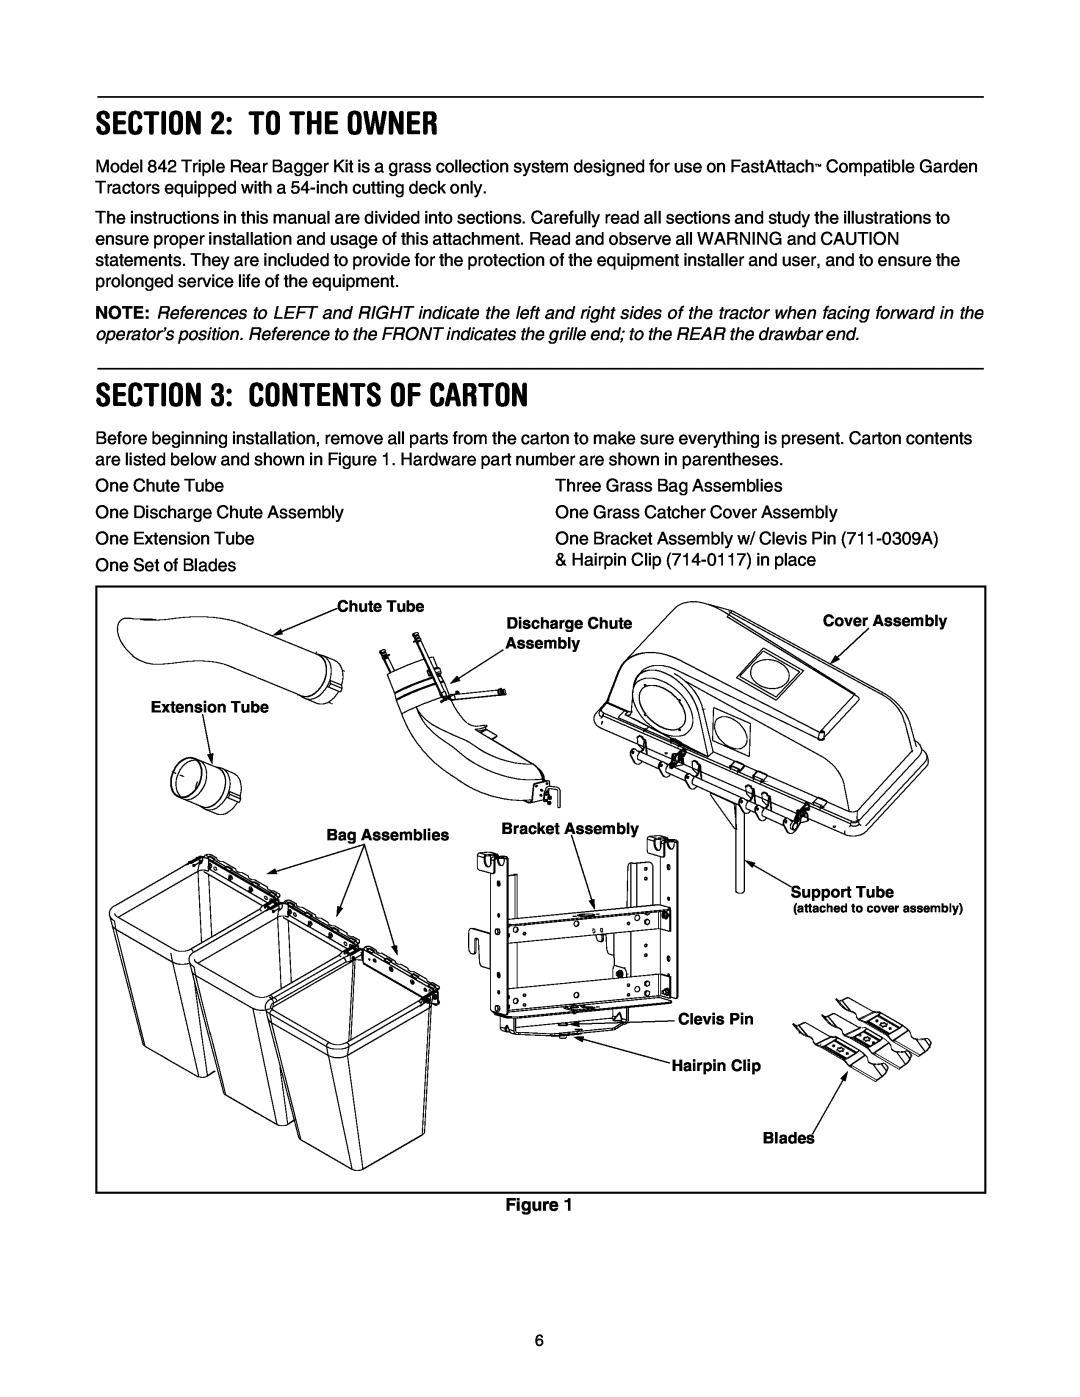 MTD Lawn Tracto manual To The Owner, Contents Of Carton 